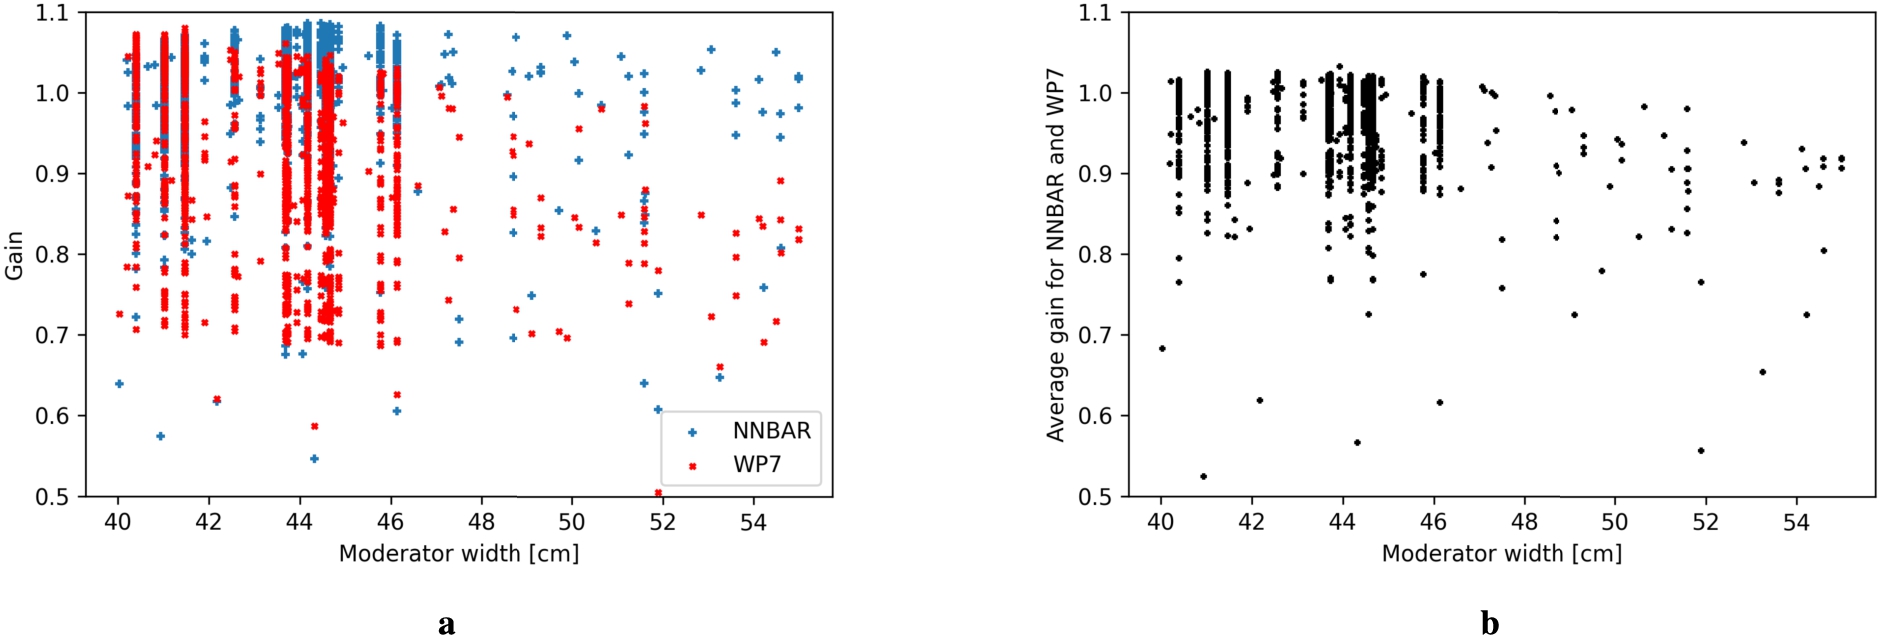 Performance of models with respect to moderator width. (A) gain in NNBAR and WP7 FOM with respect to the baseline model. (B) average gain in NNBAR and WP7 FOM with respect to the baseline model.